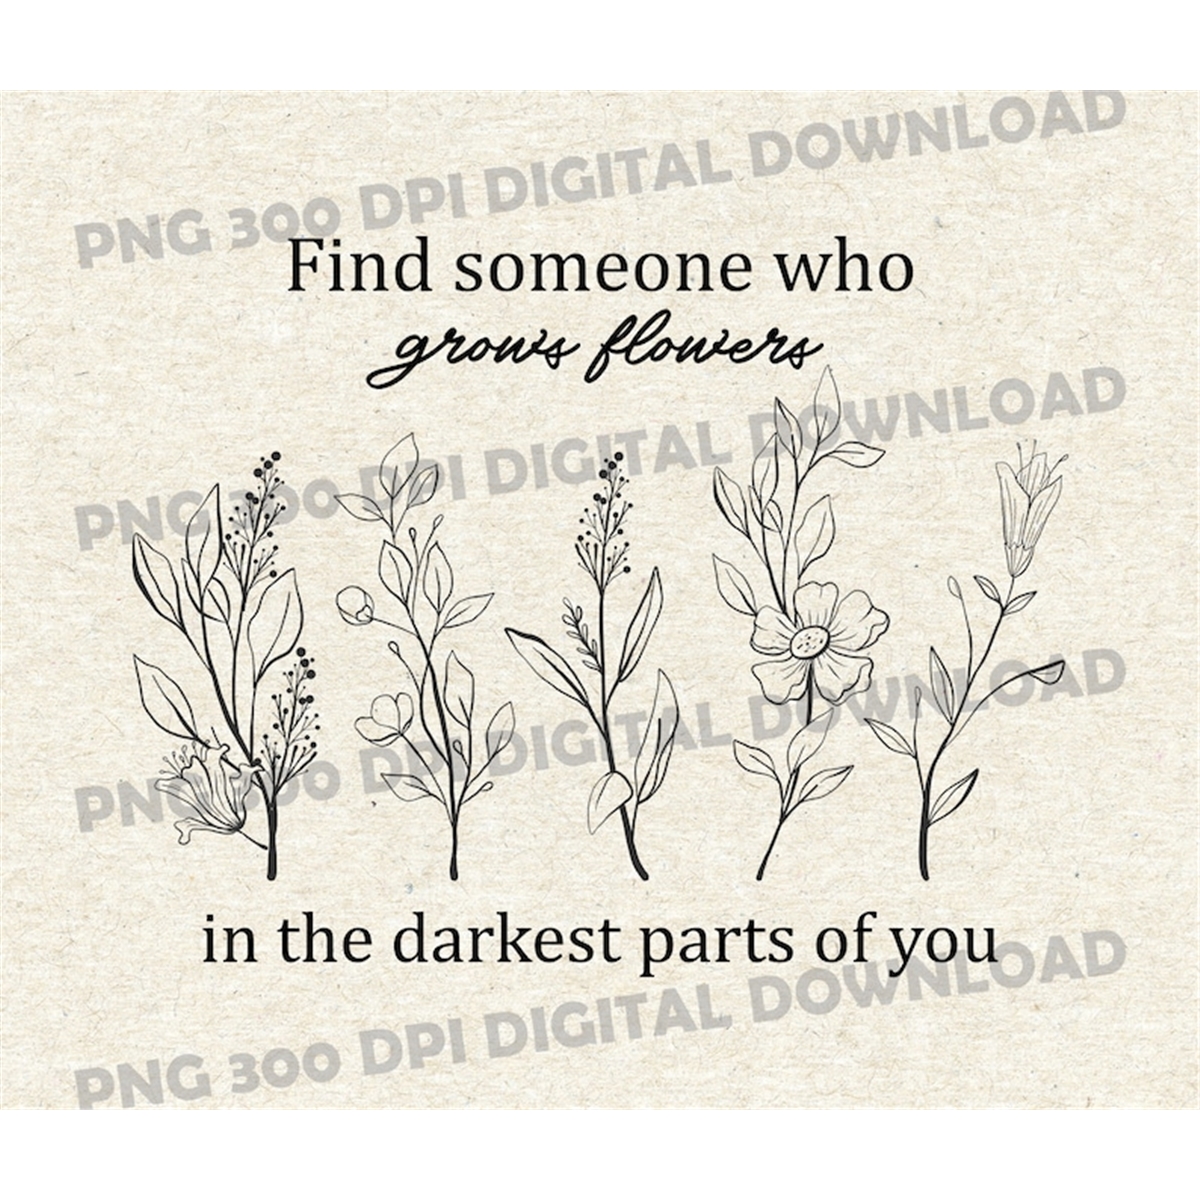 find-someone-who-grows-flowers-in-the-darkest-parts-of-you-image-1